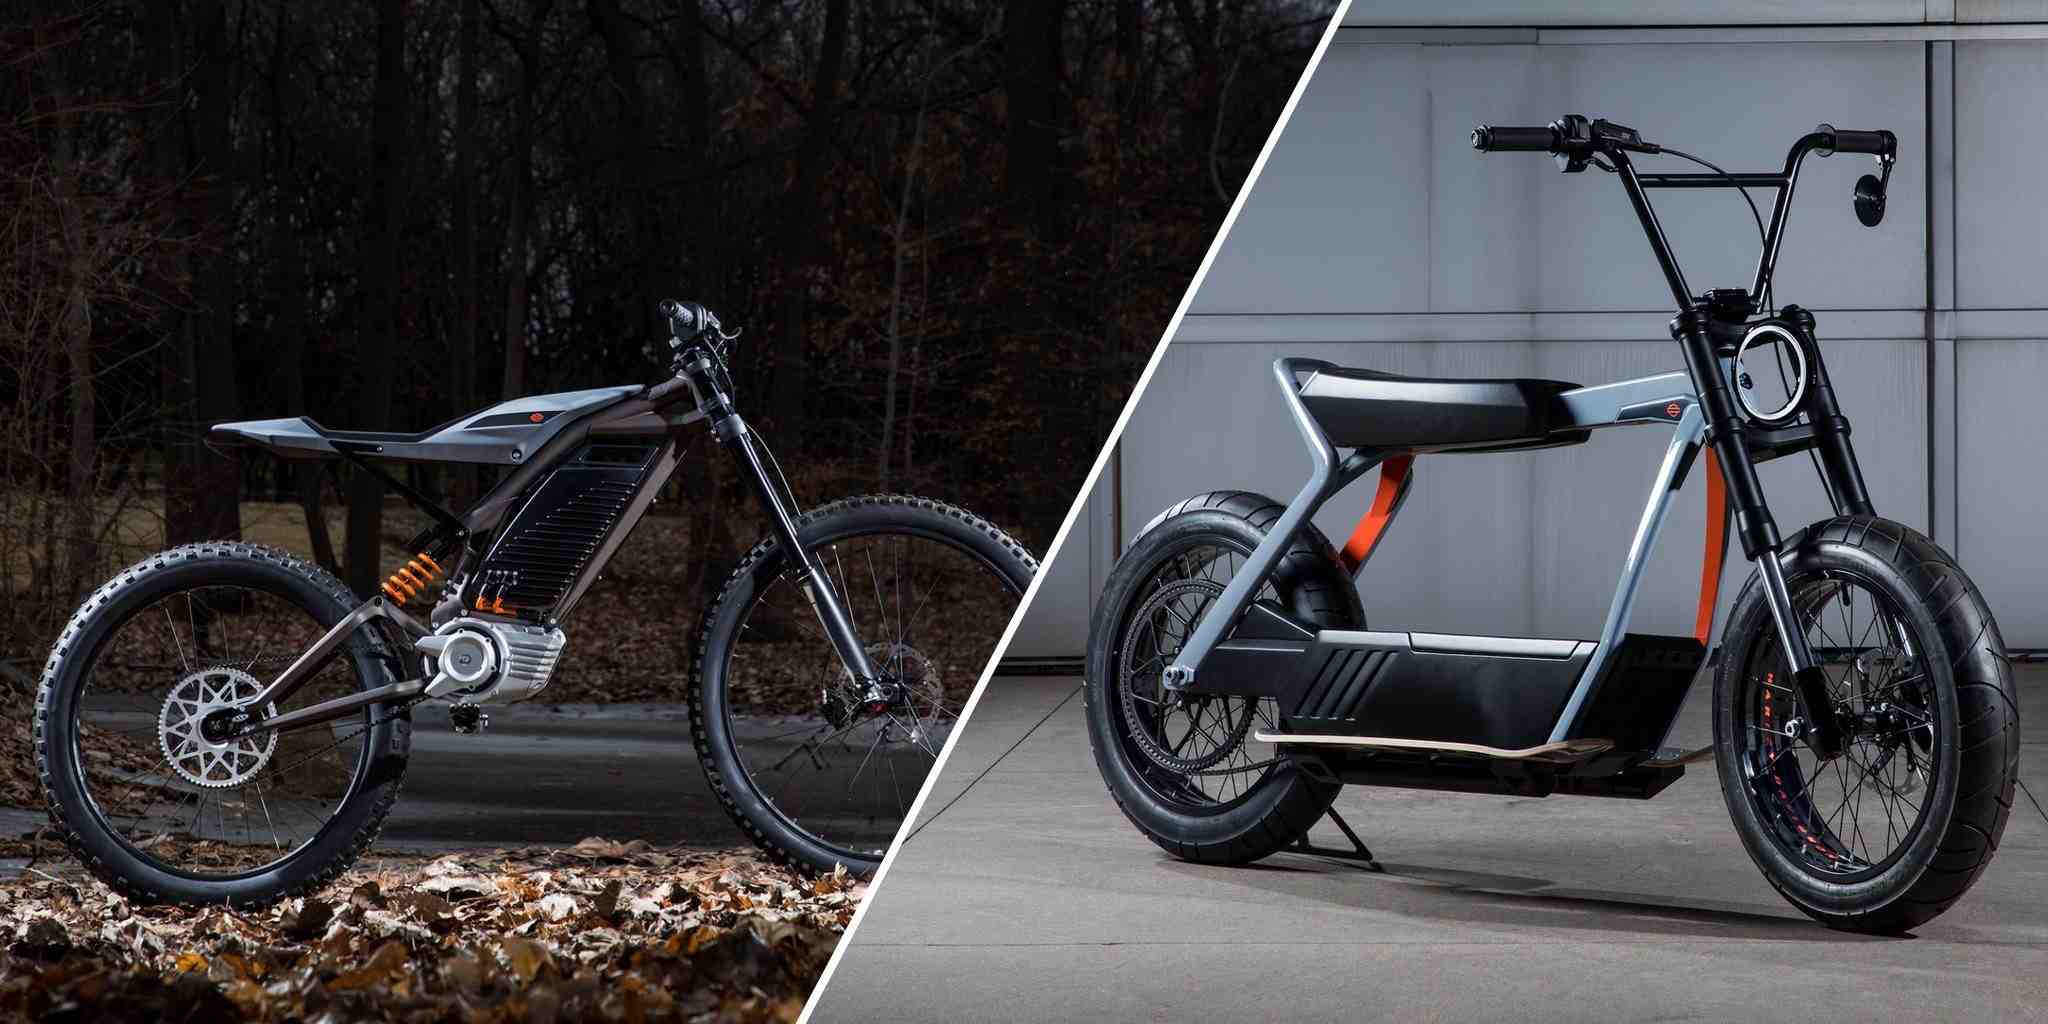 Are electric bikes considered motorized vehicles?